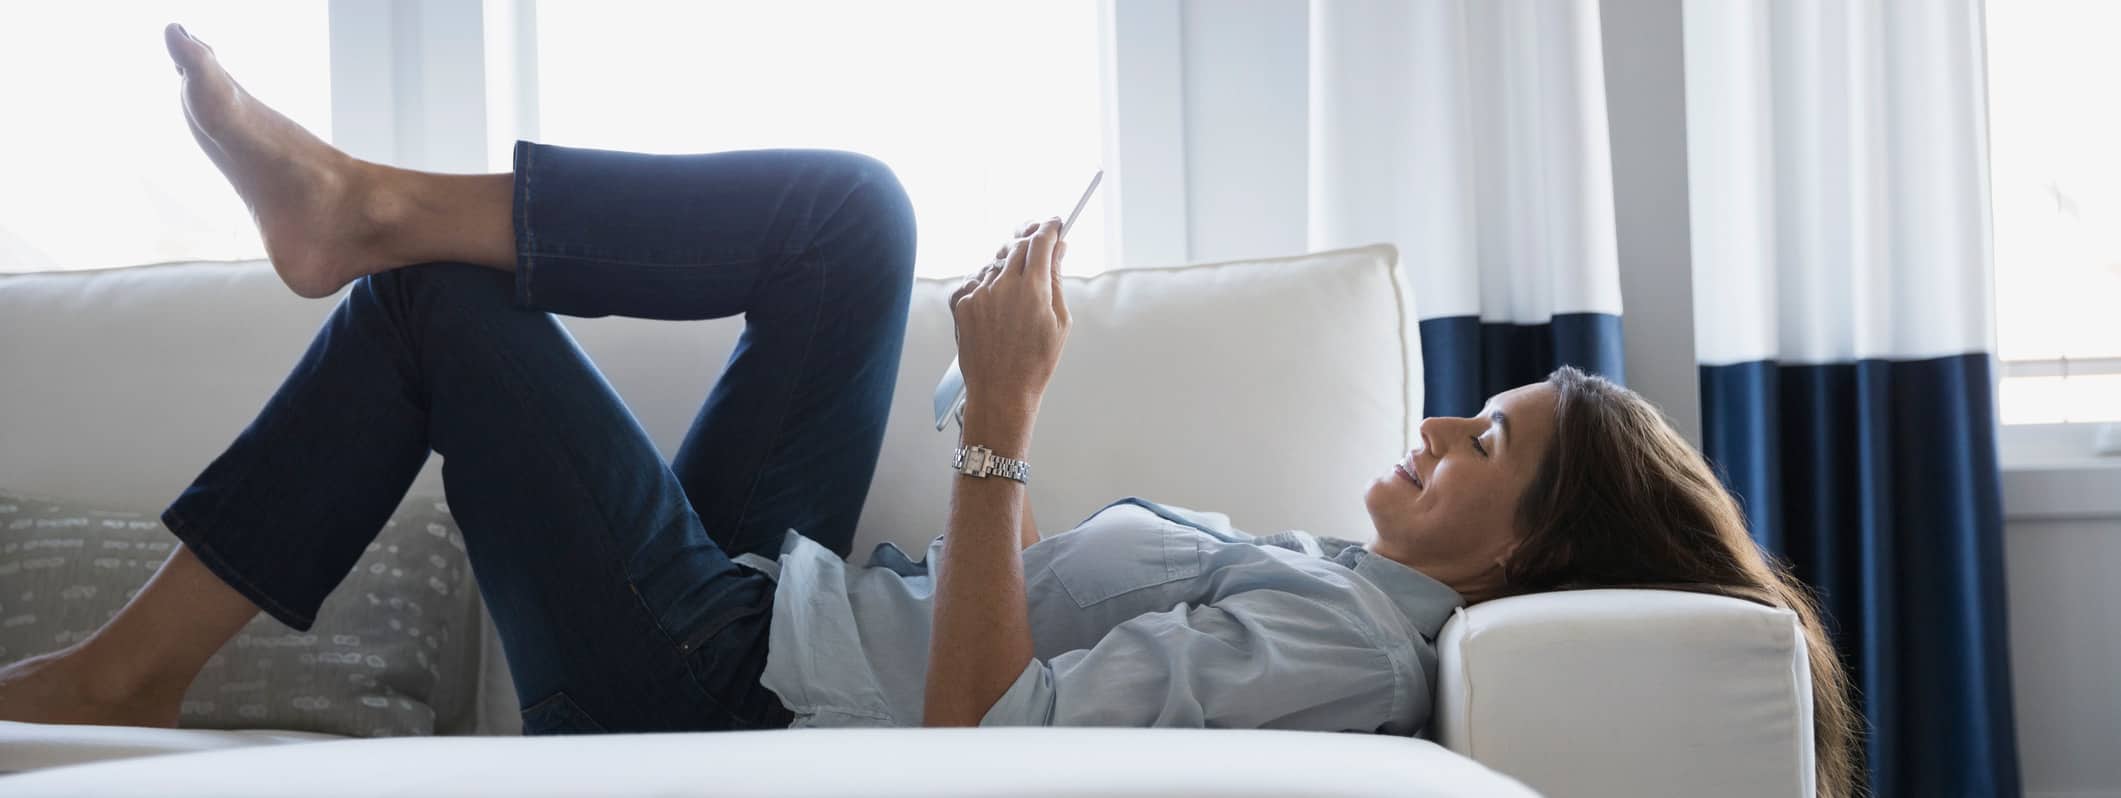 Woman relaxing on a couch with a digital tablet.